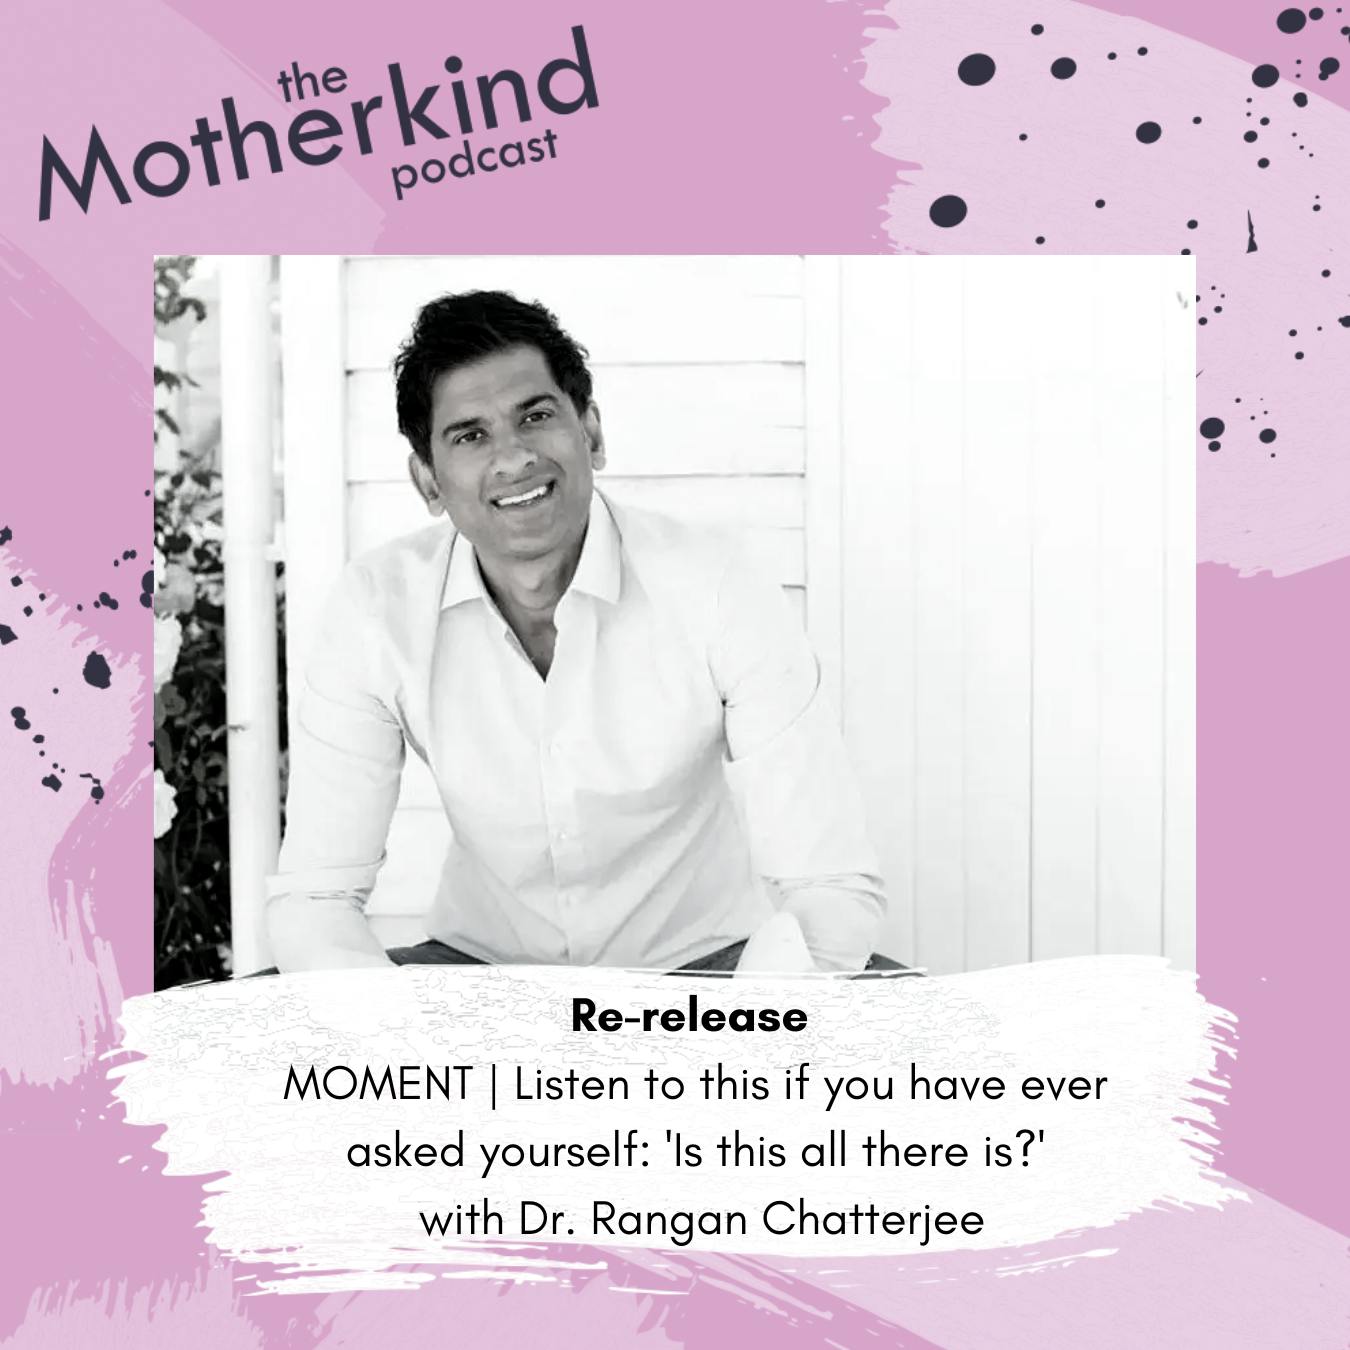 Re-release MOMENT | Listen to this if you have ever asked yourself: ’Is this all there is?’ with Dr. Rangan Chatterjee